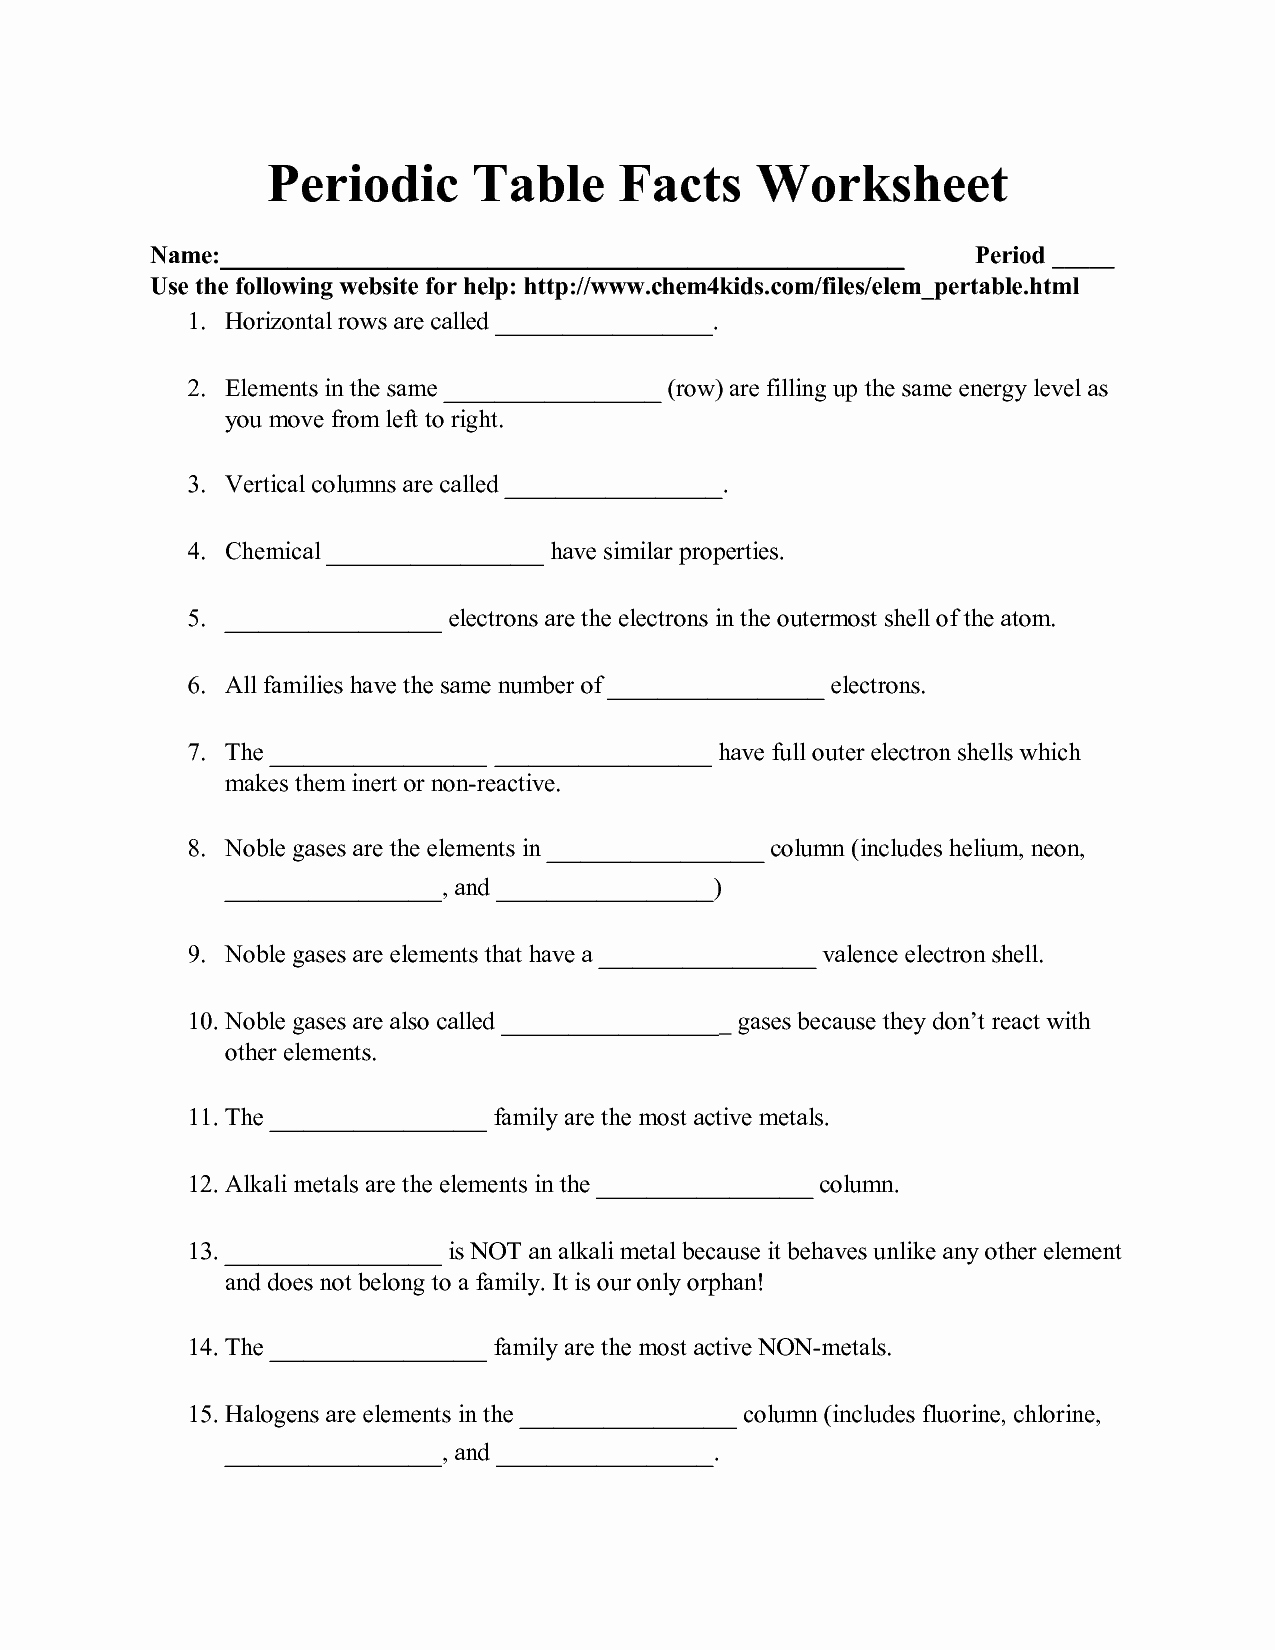 Periodic Table Worksheet High School New Chemistry Periodic Table Worksheet Answers